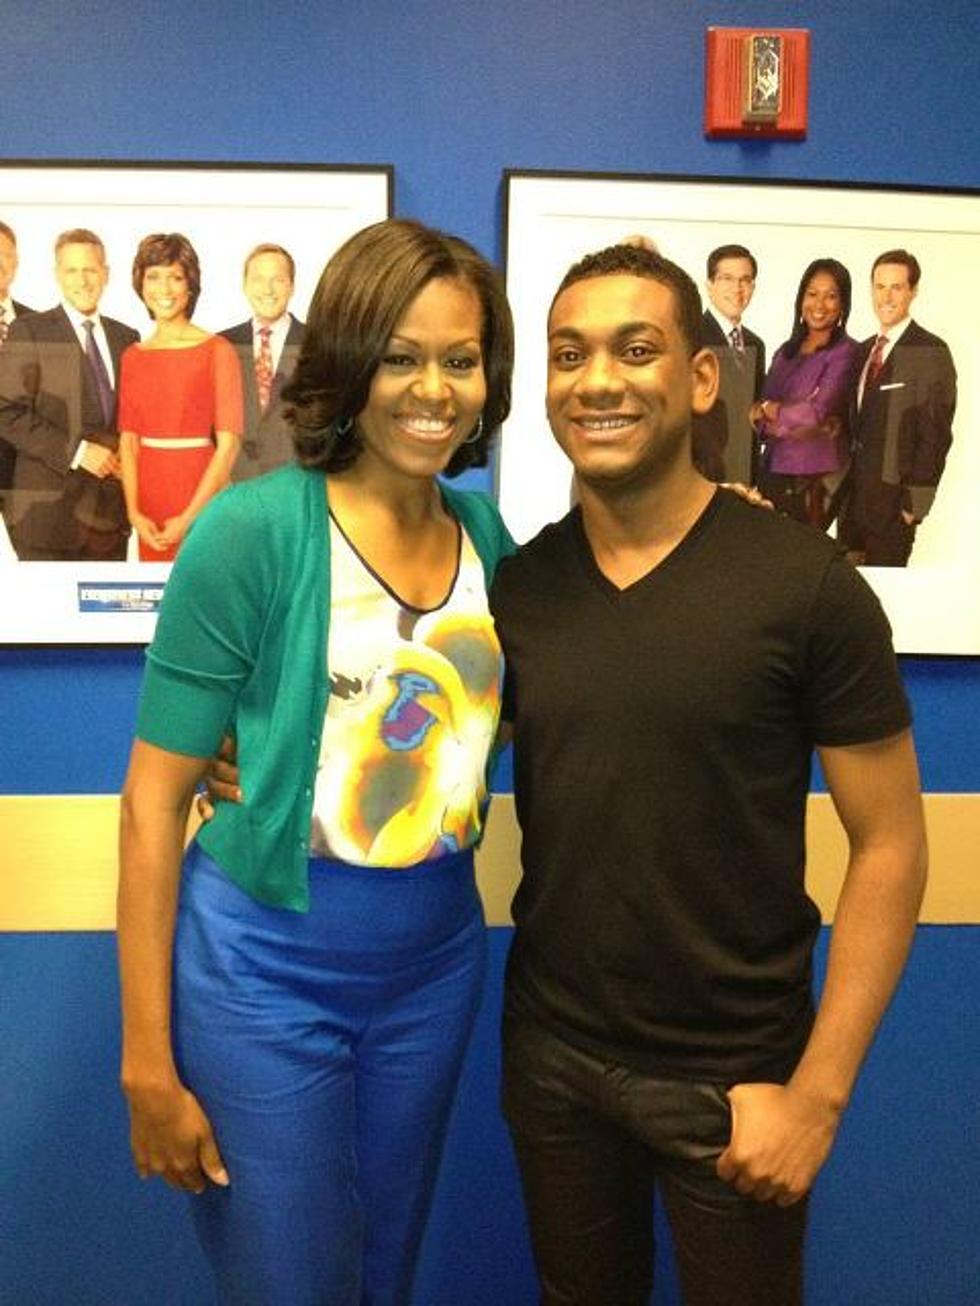 Joshua Ledet&#8217;s Mentor Speaks &#8212; And, How Josh Met the First Lady in New York! [PHOTOS]